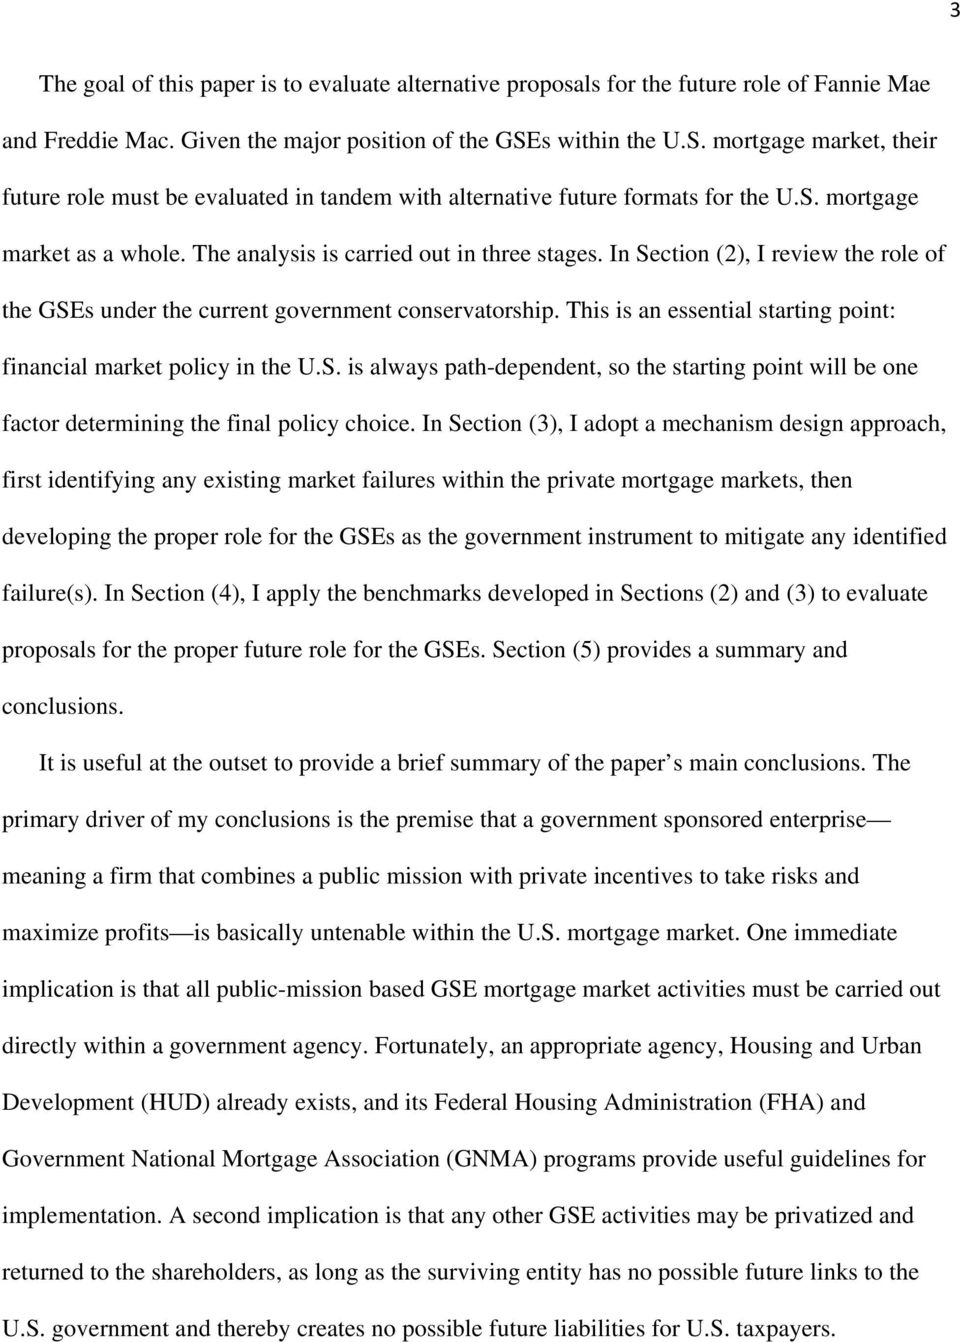 In Section (2), I review the role of the GSEs under the current government conservatorship. This is an essential starting point: financial market policy in the U.S. is always path-dependent, so the starting point will be one factor determining the final policy choice.